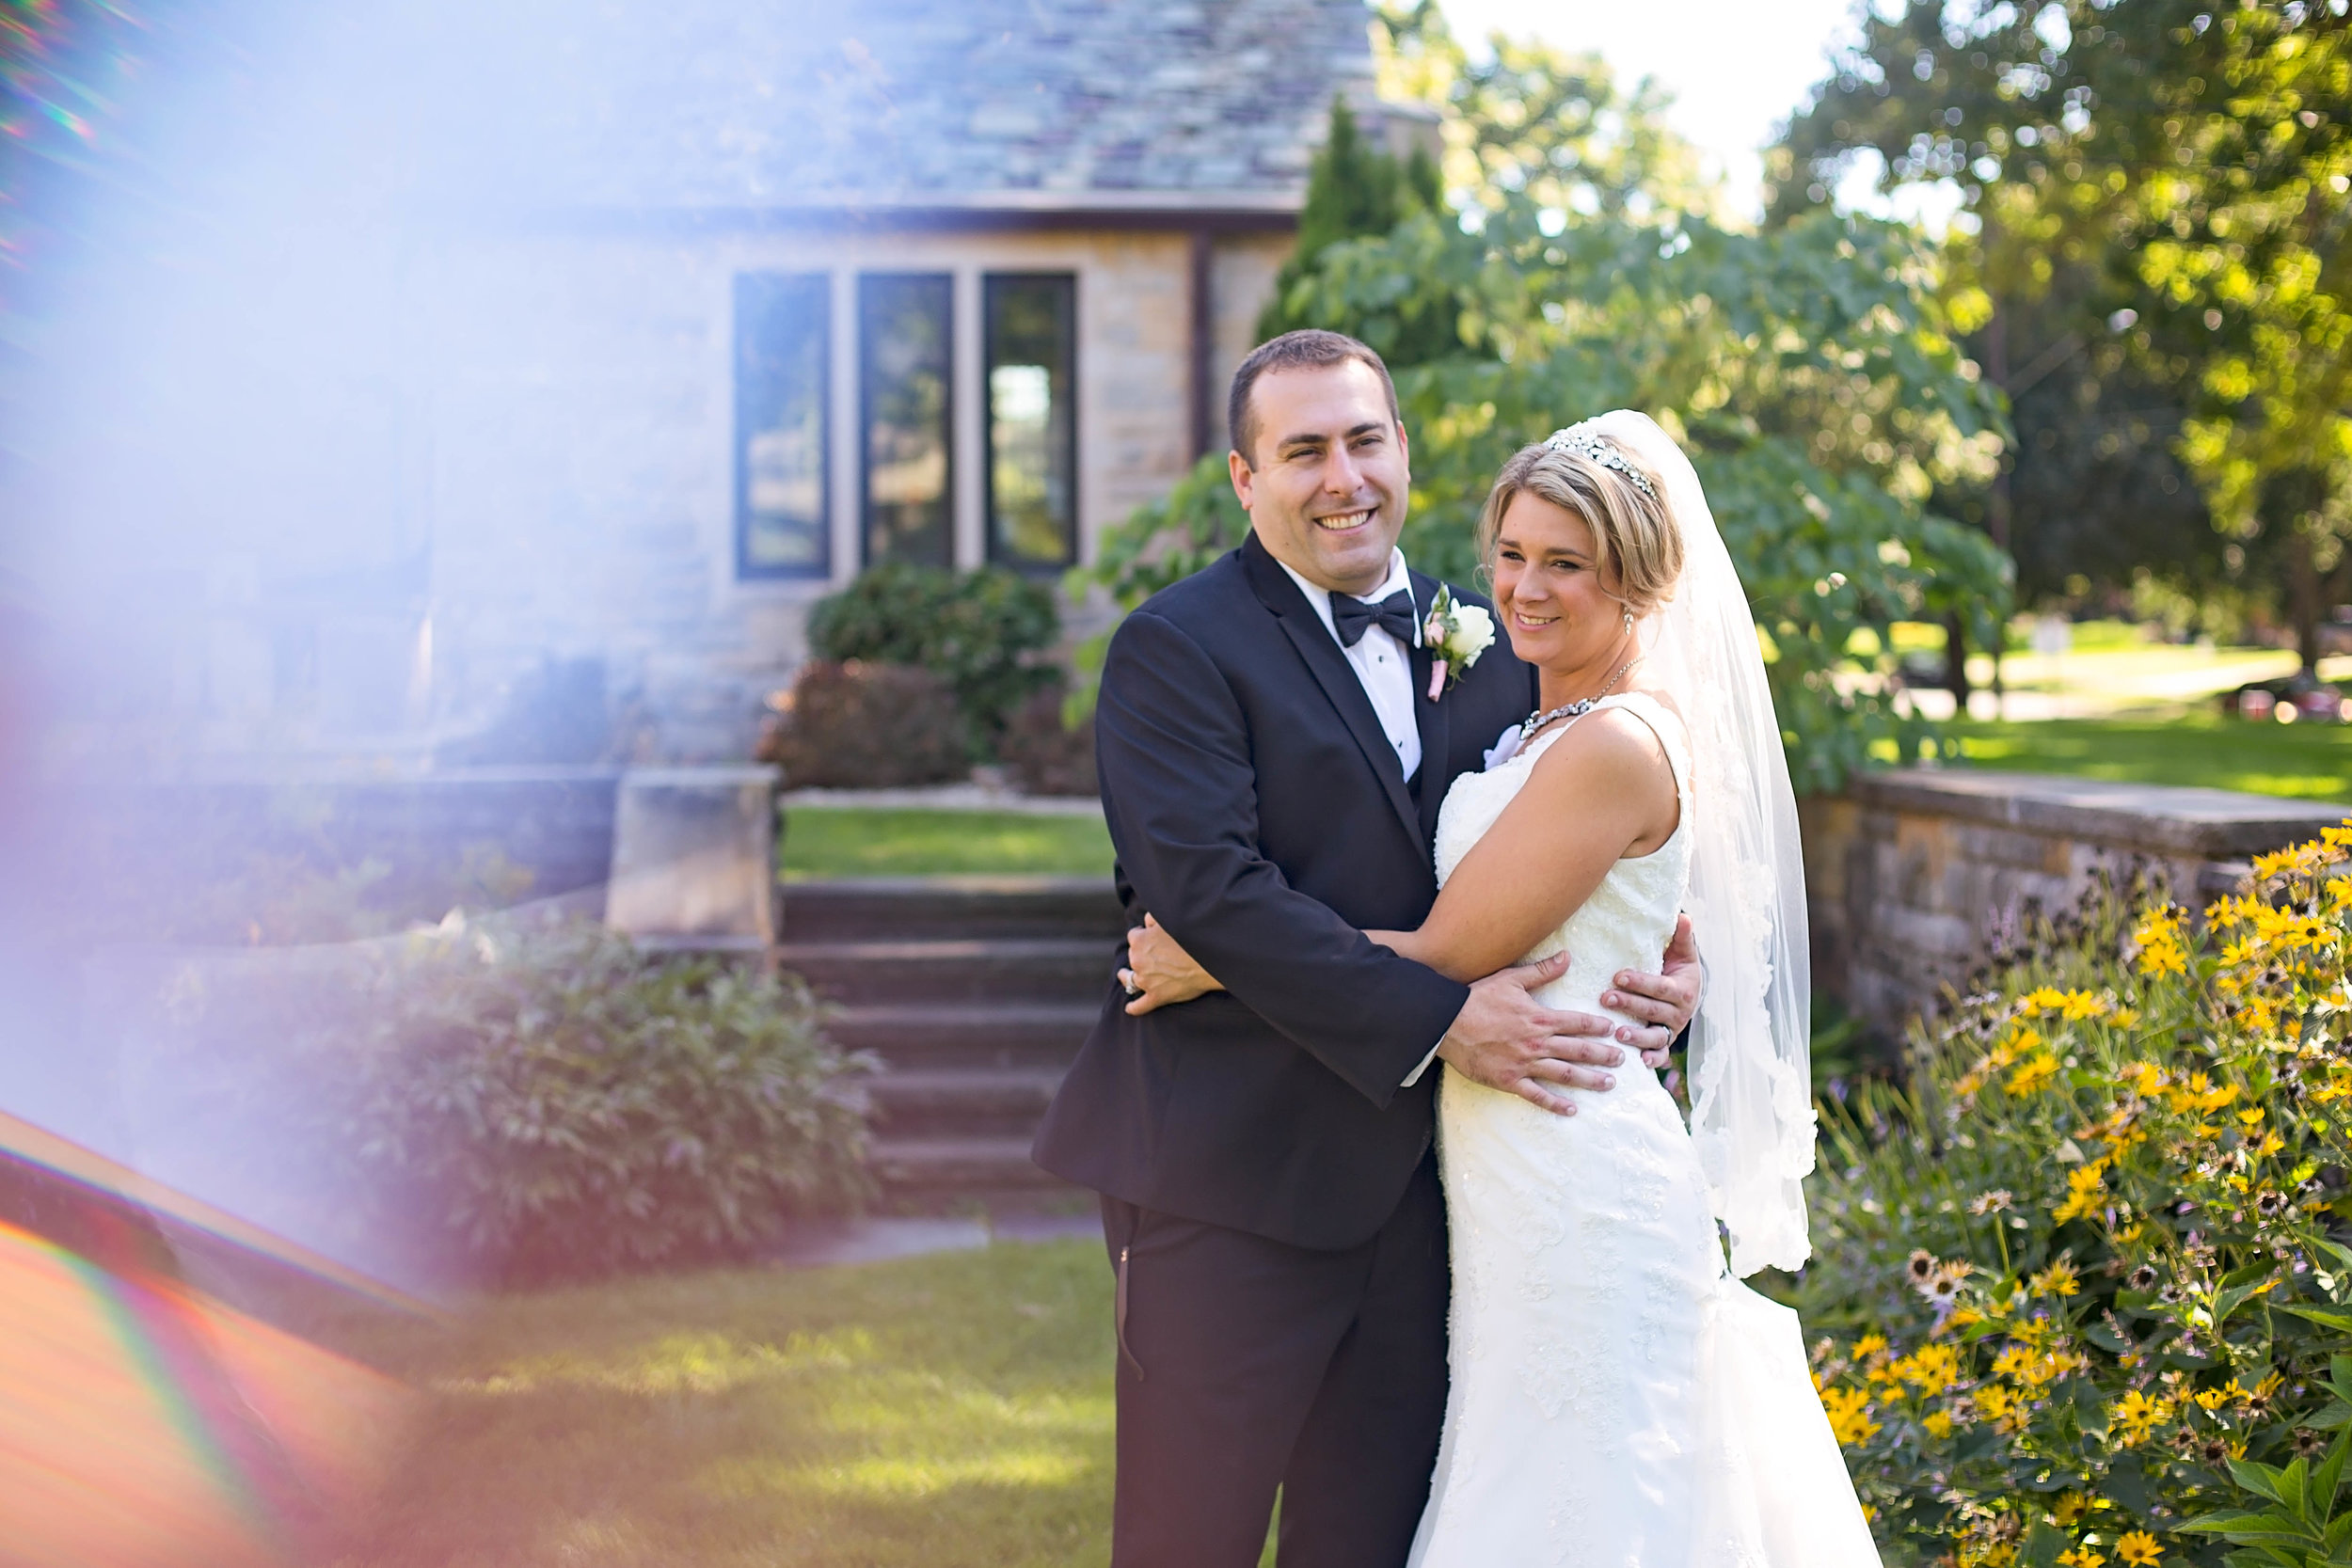 Marry Me Photography Wedding And Newborn Photography Jackson Mi Lansing Mi And The Surrounding Areas